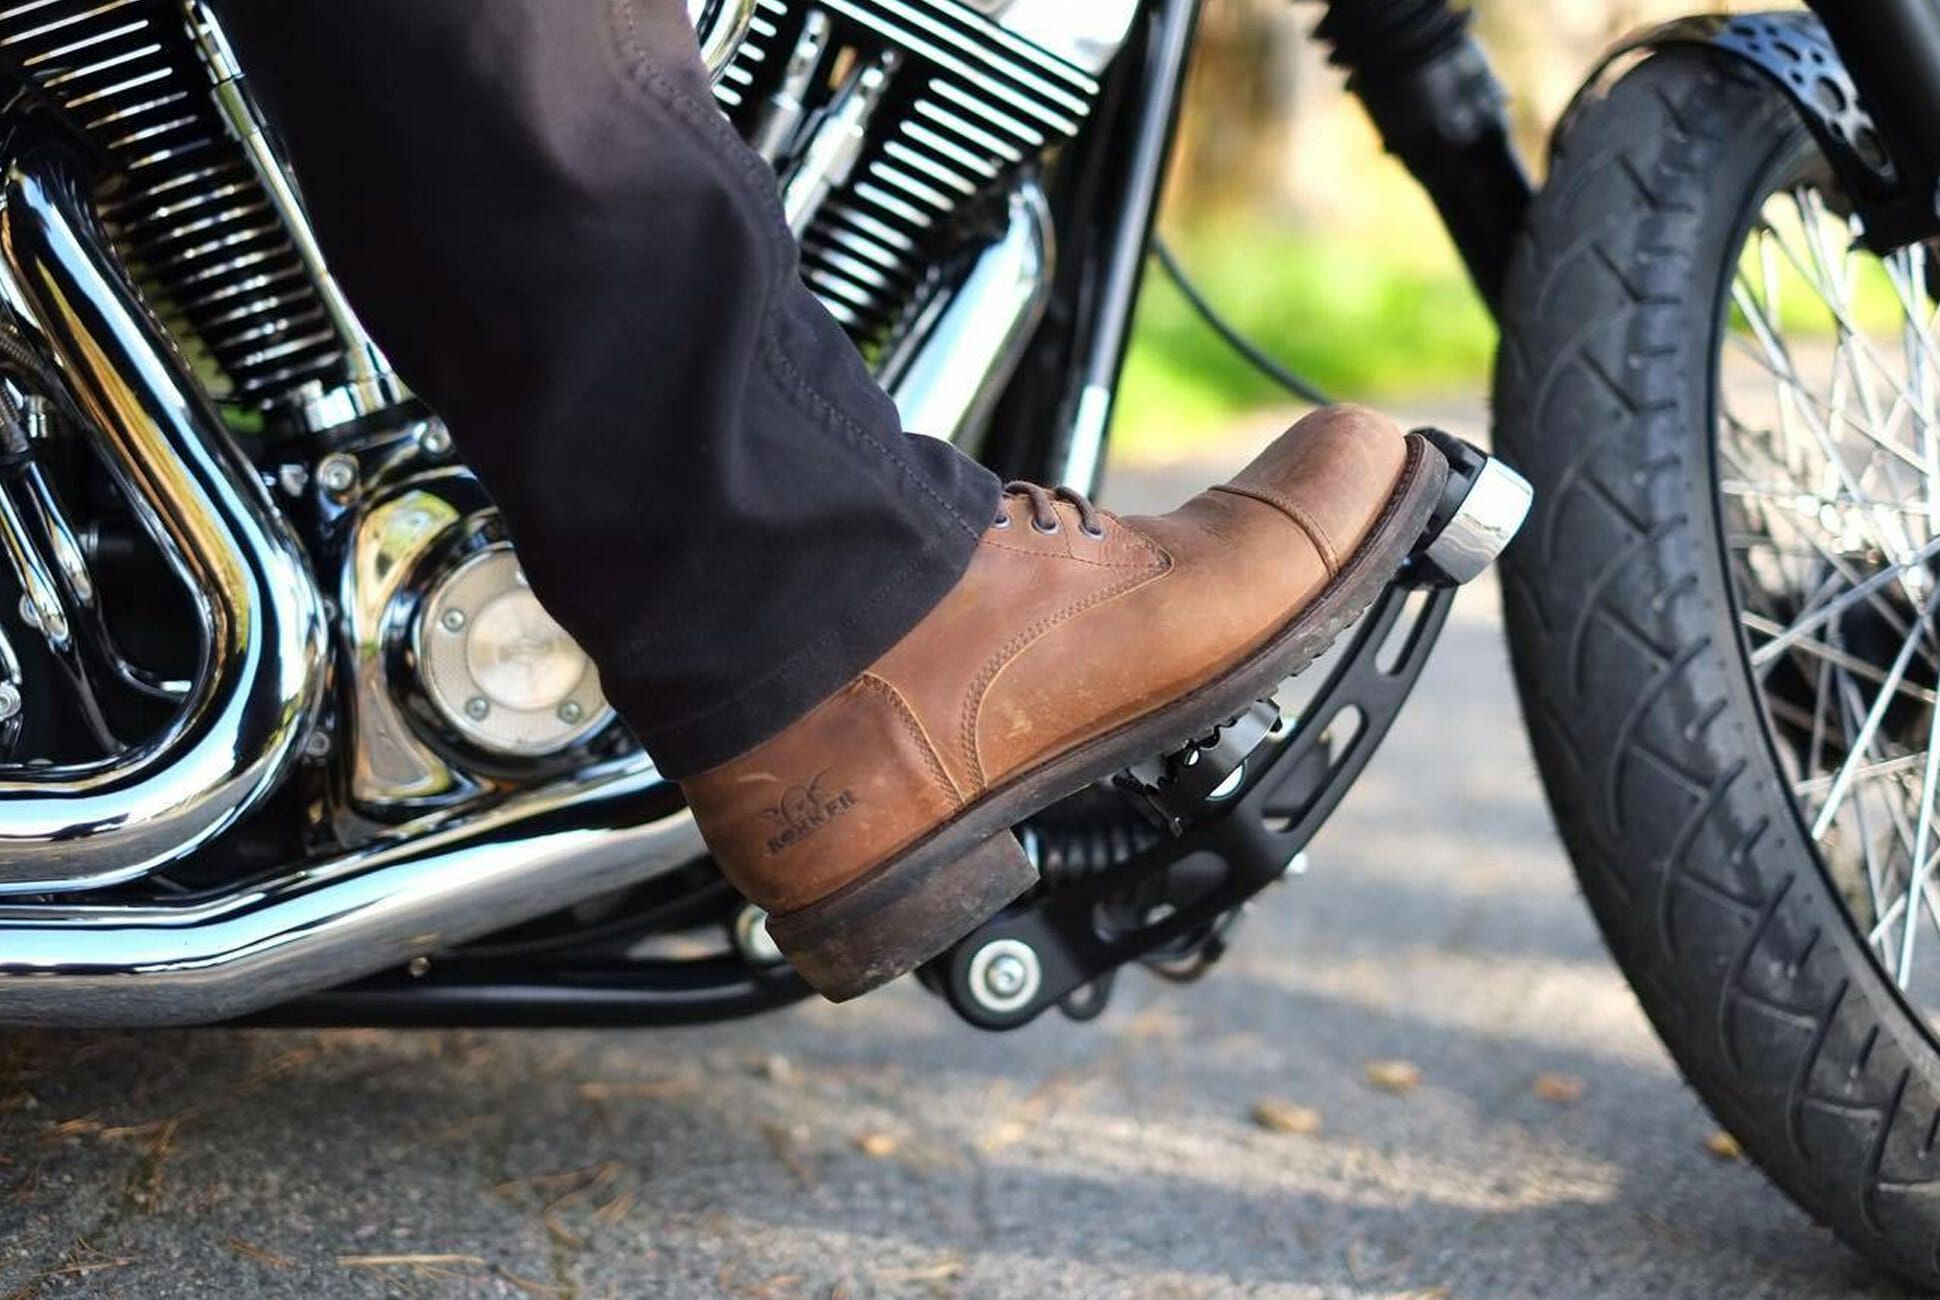 fashionable motorcycle boots